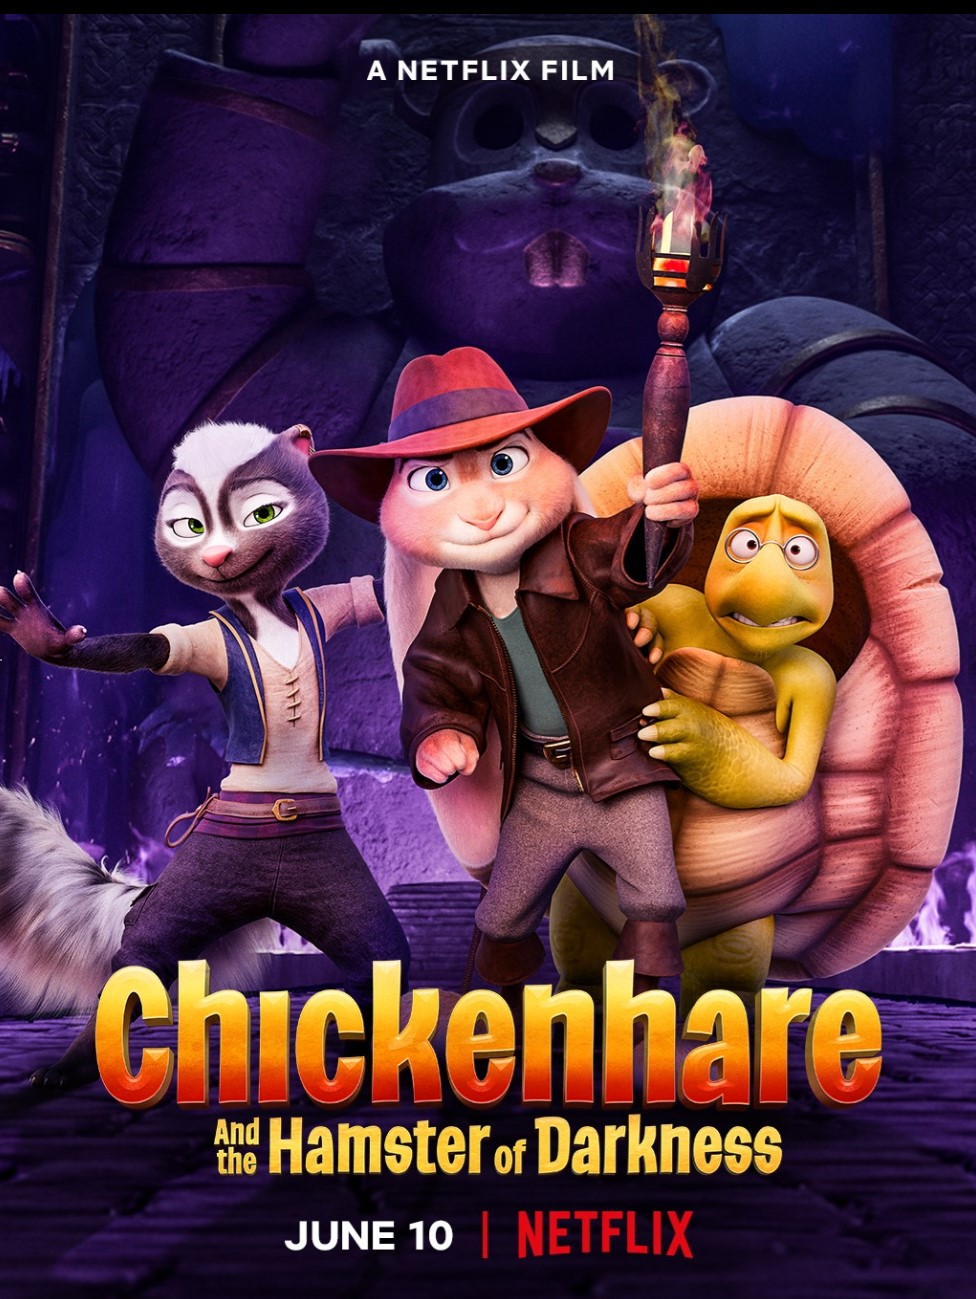 Chickenhare and the Hamster of Darkness movie review - Movie Review Mom